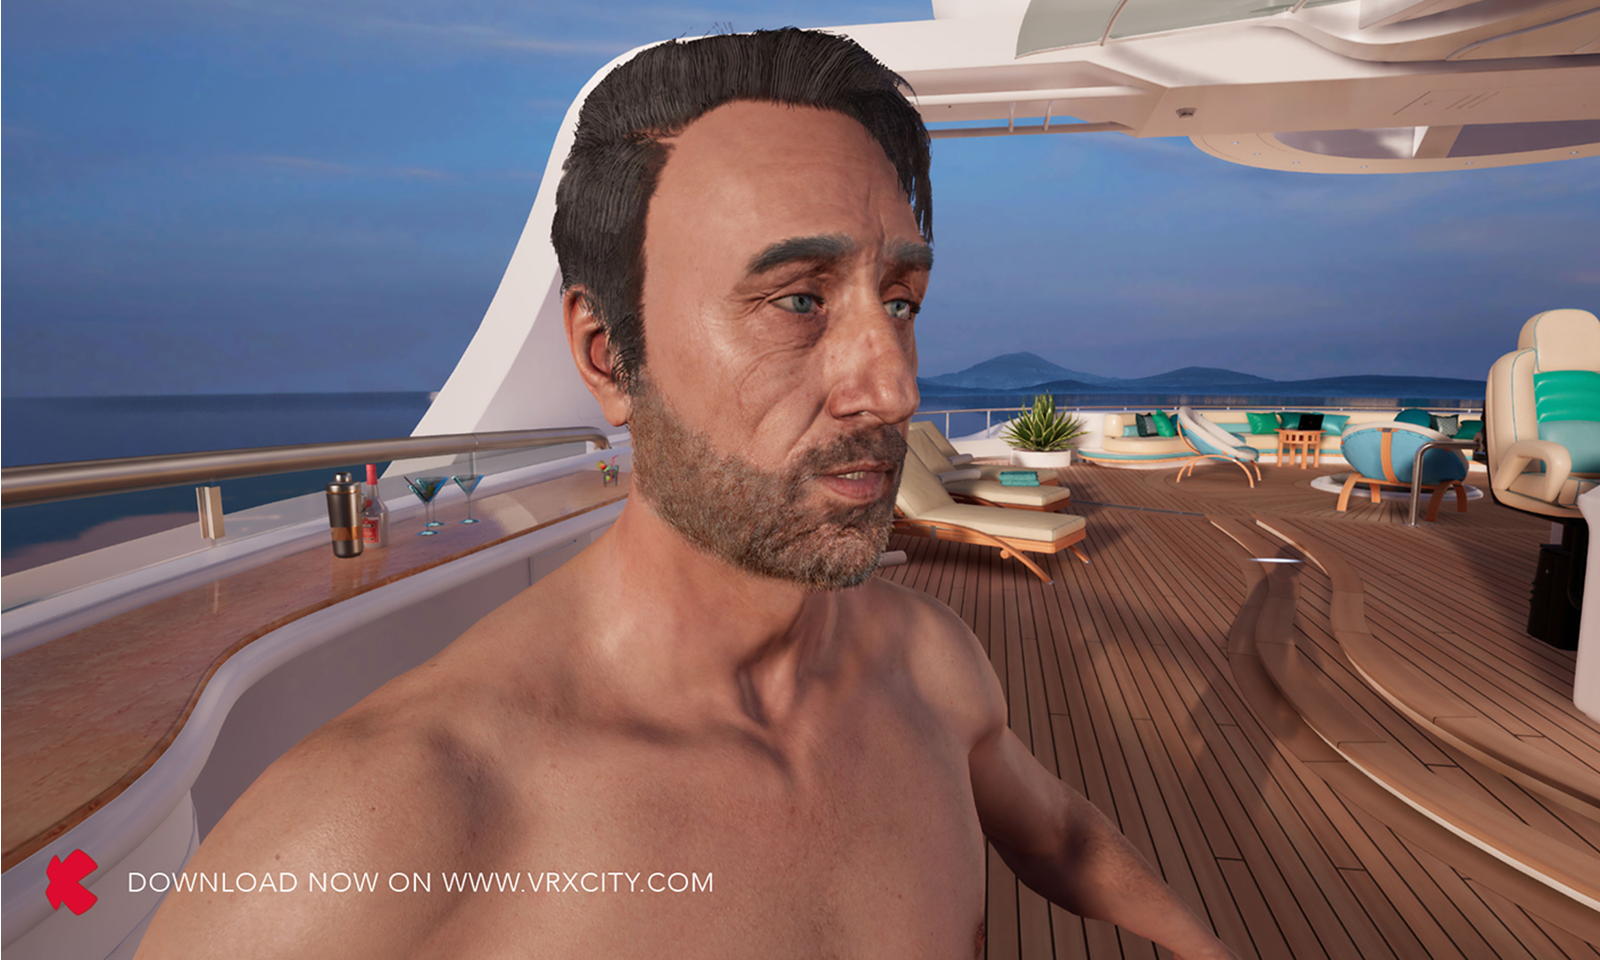 vrXcity Adds Steve Holmes Character to Its Online VR Game